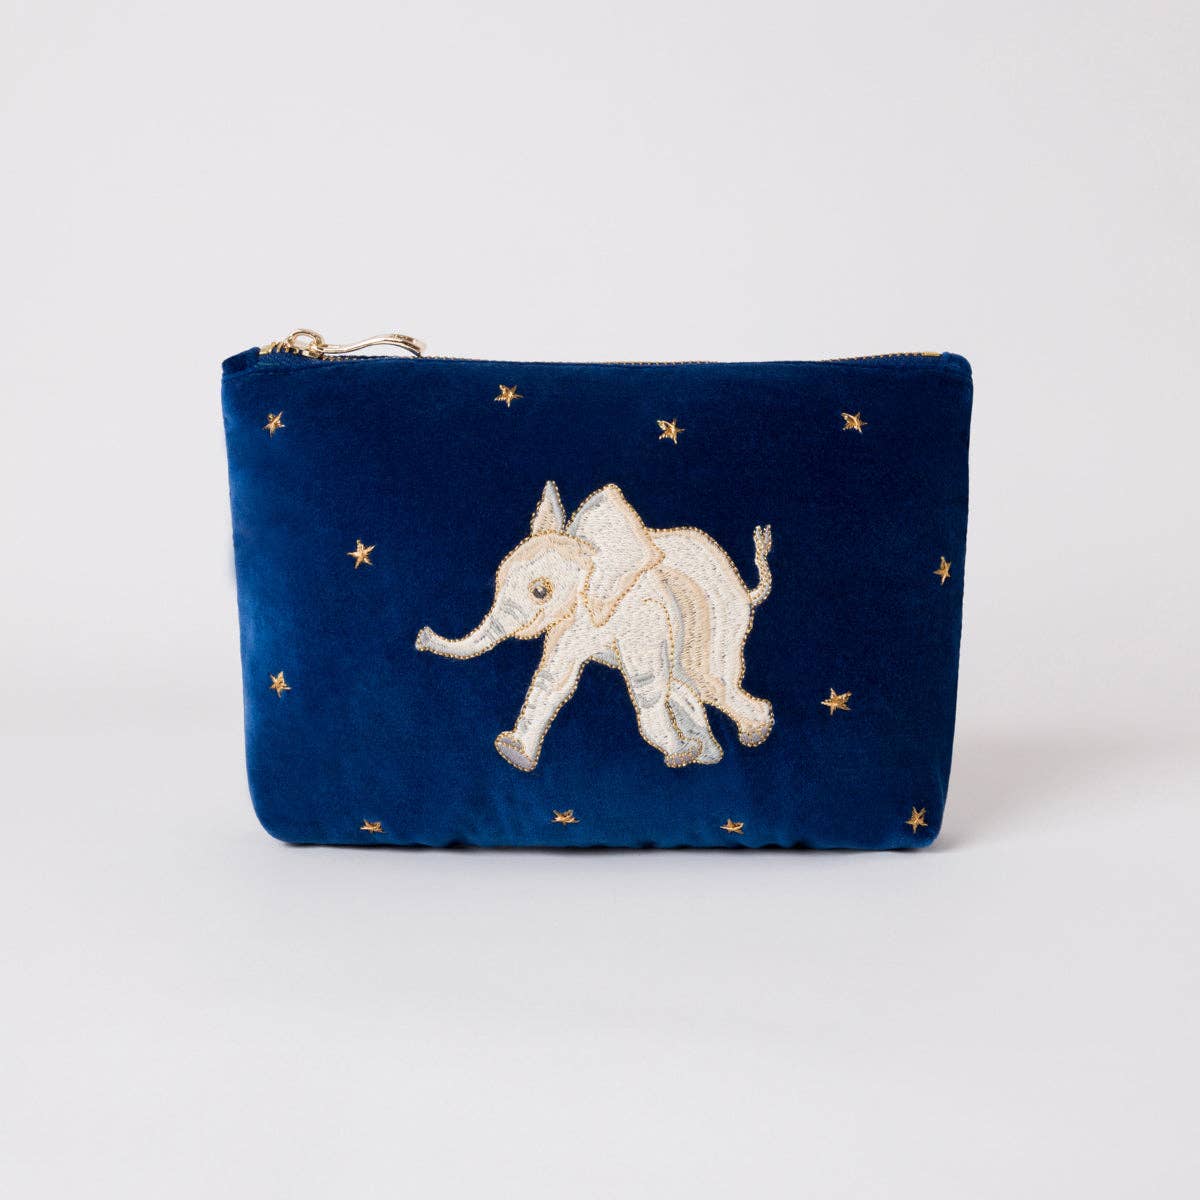 Elizabeth scarlett orphaned elephant conservation collection mini pouch